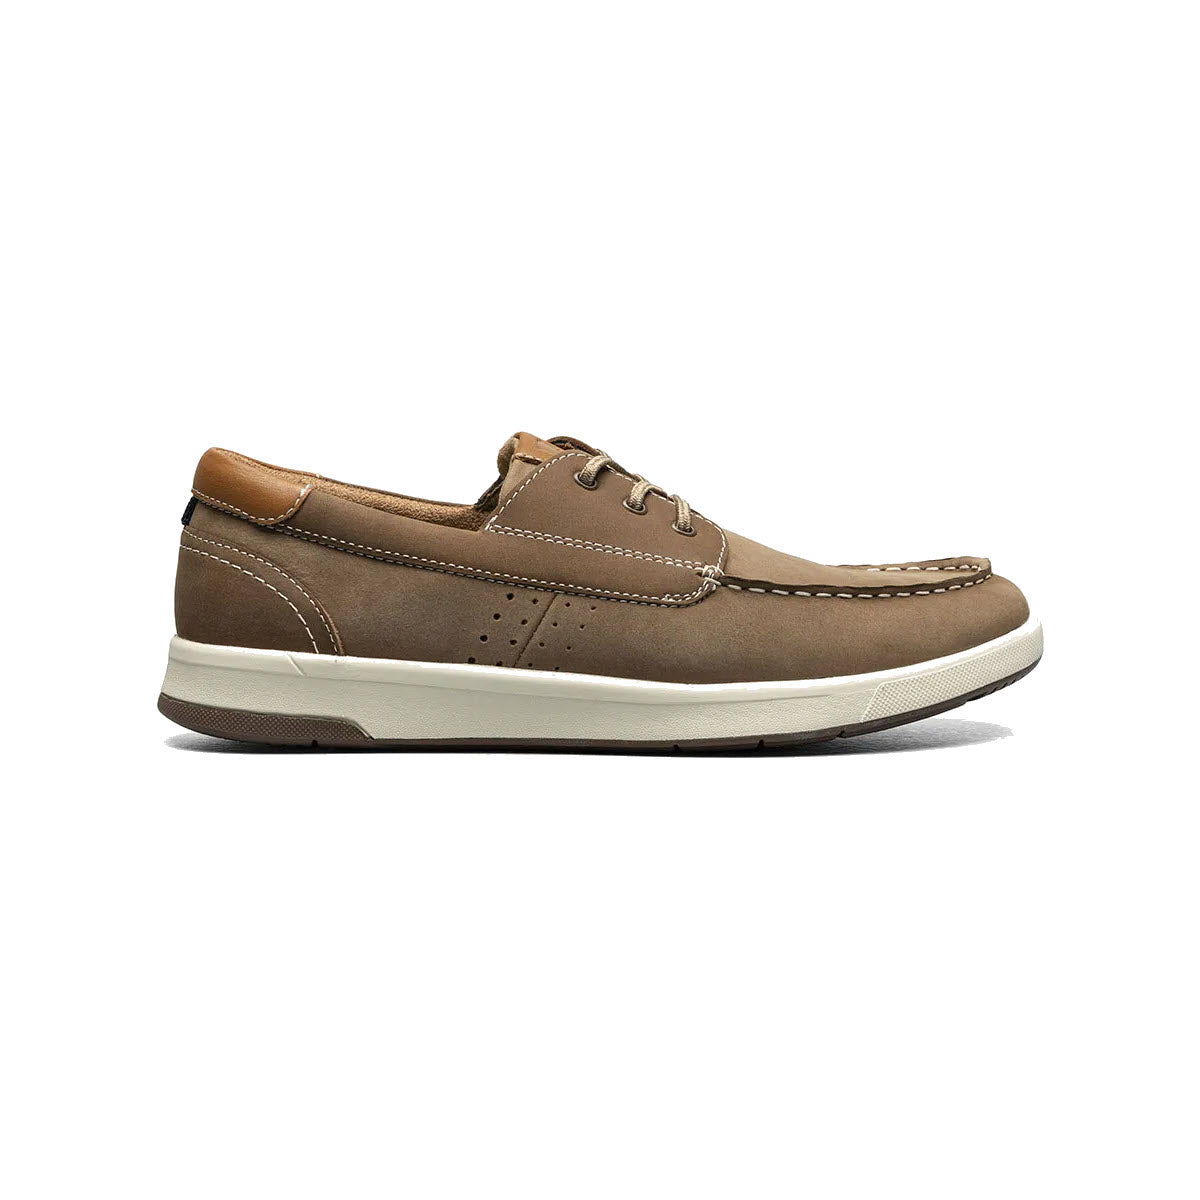 A single Florsheim Crossover Moc Toe boat shoe in mushroom nubuck leather with white soles and laces, isolated on a white background.